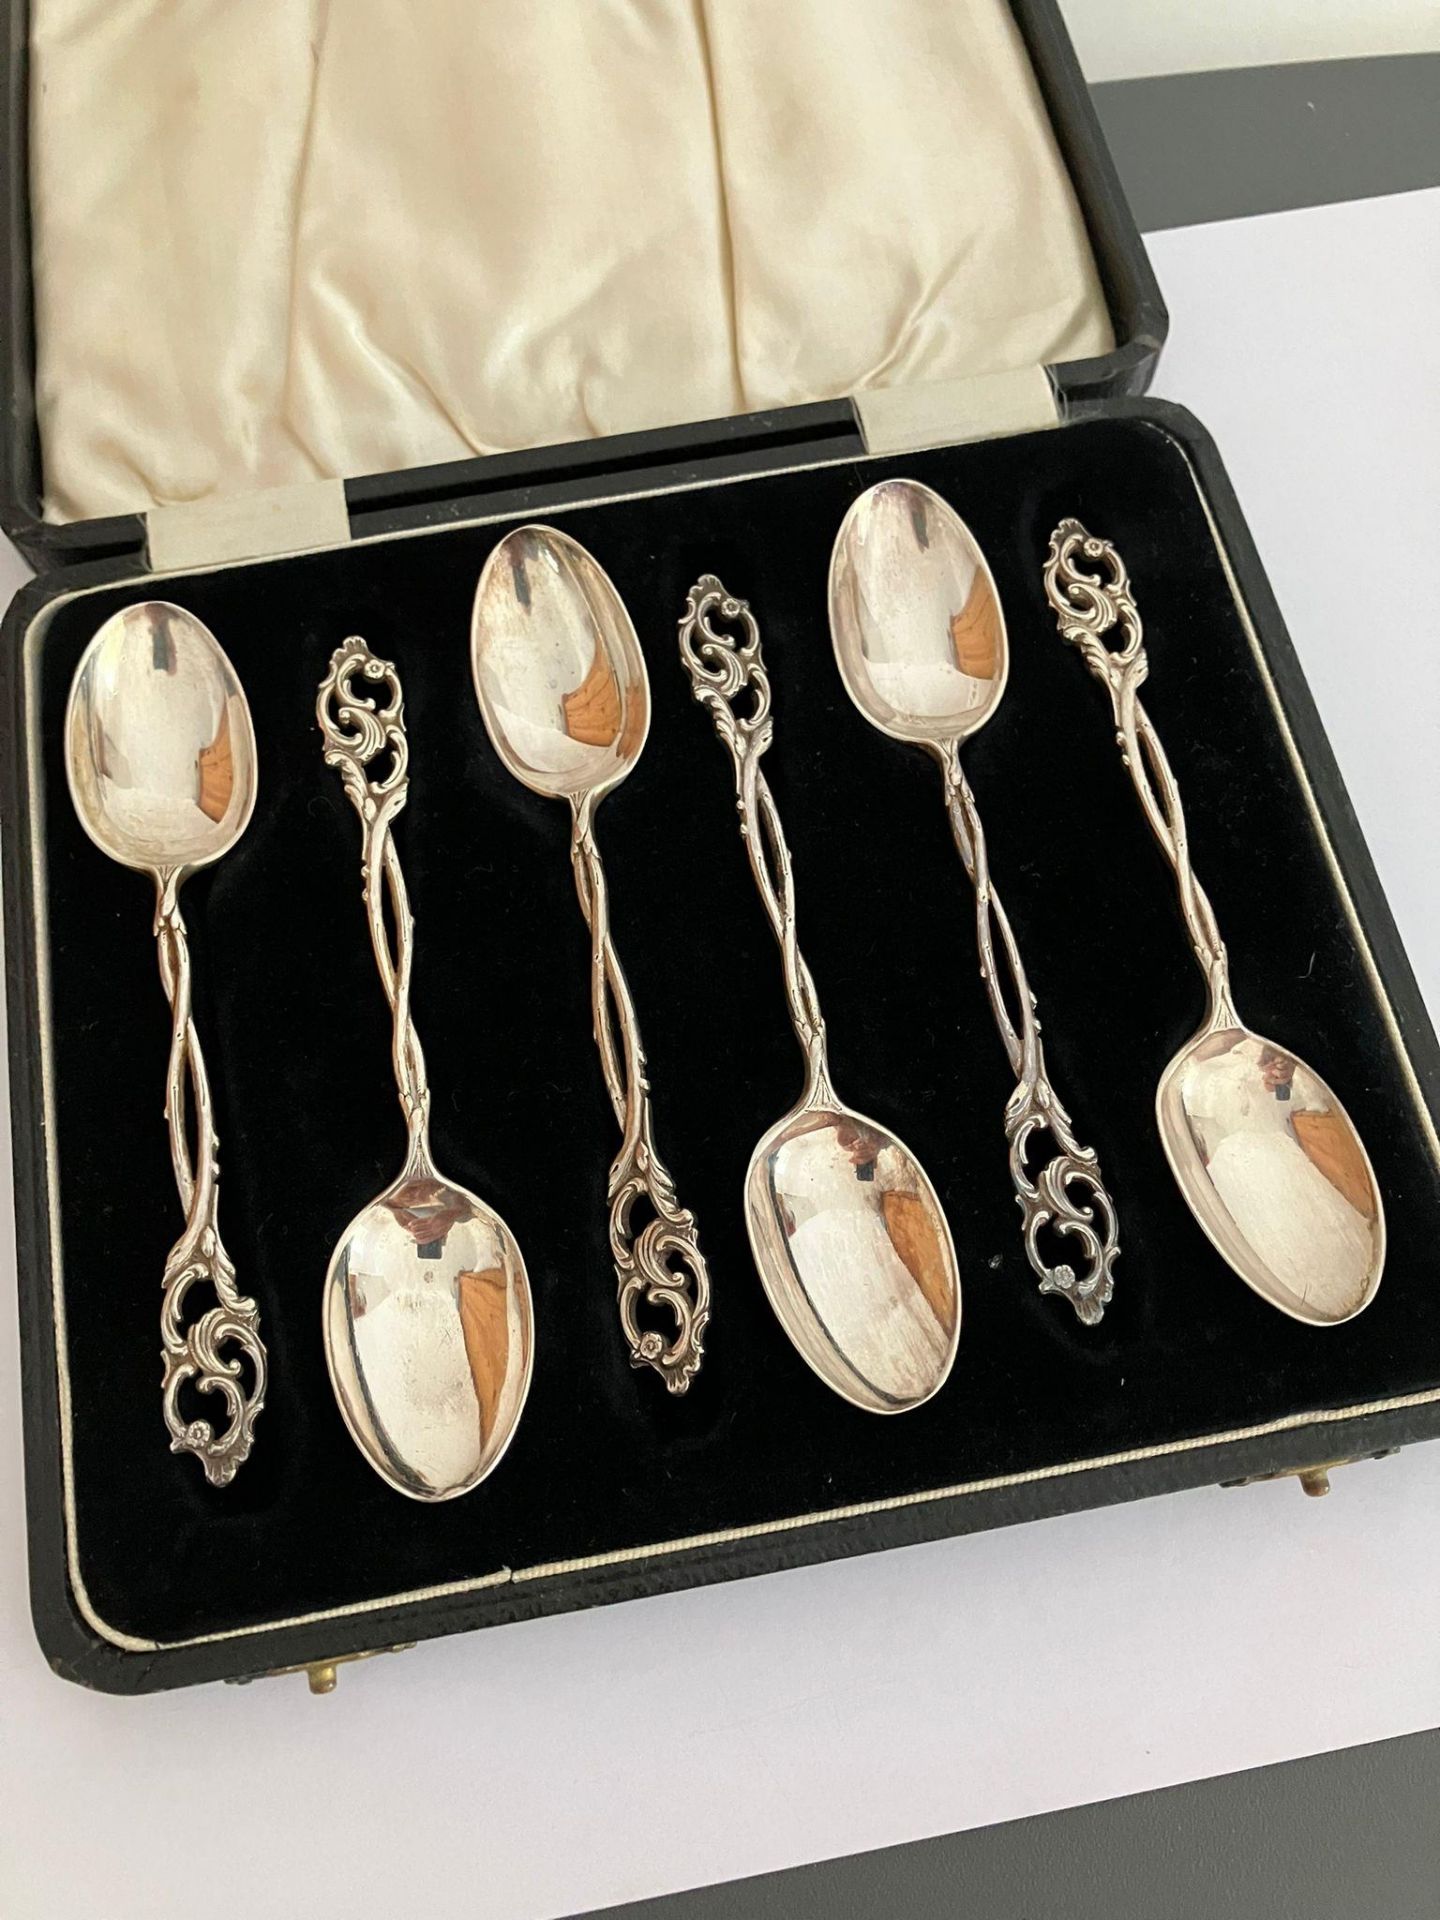 Antique Set of six matching SILVER TEASPOONS in Beautiful Art Nouveau design. Clear hallmark for